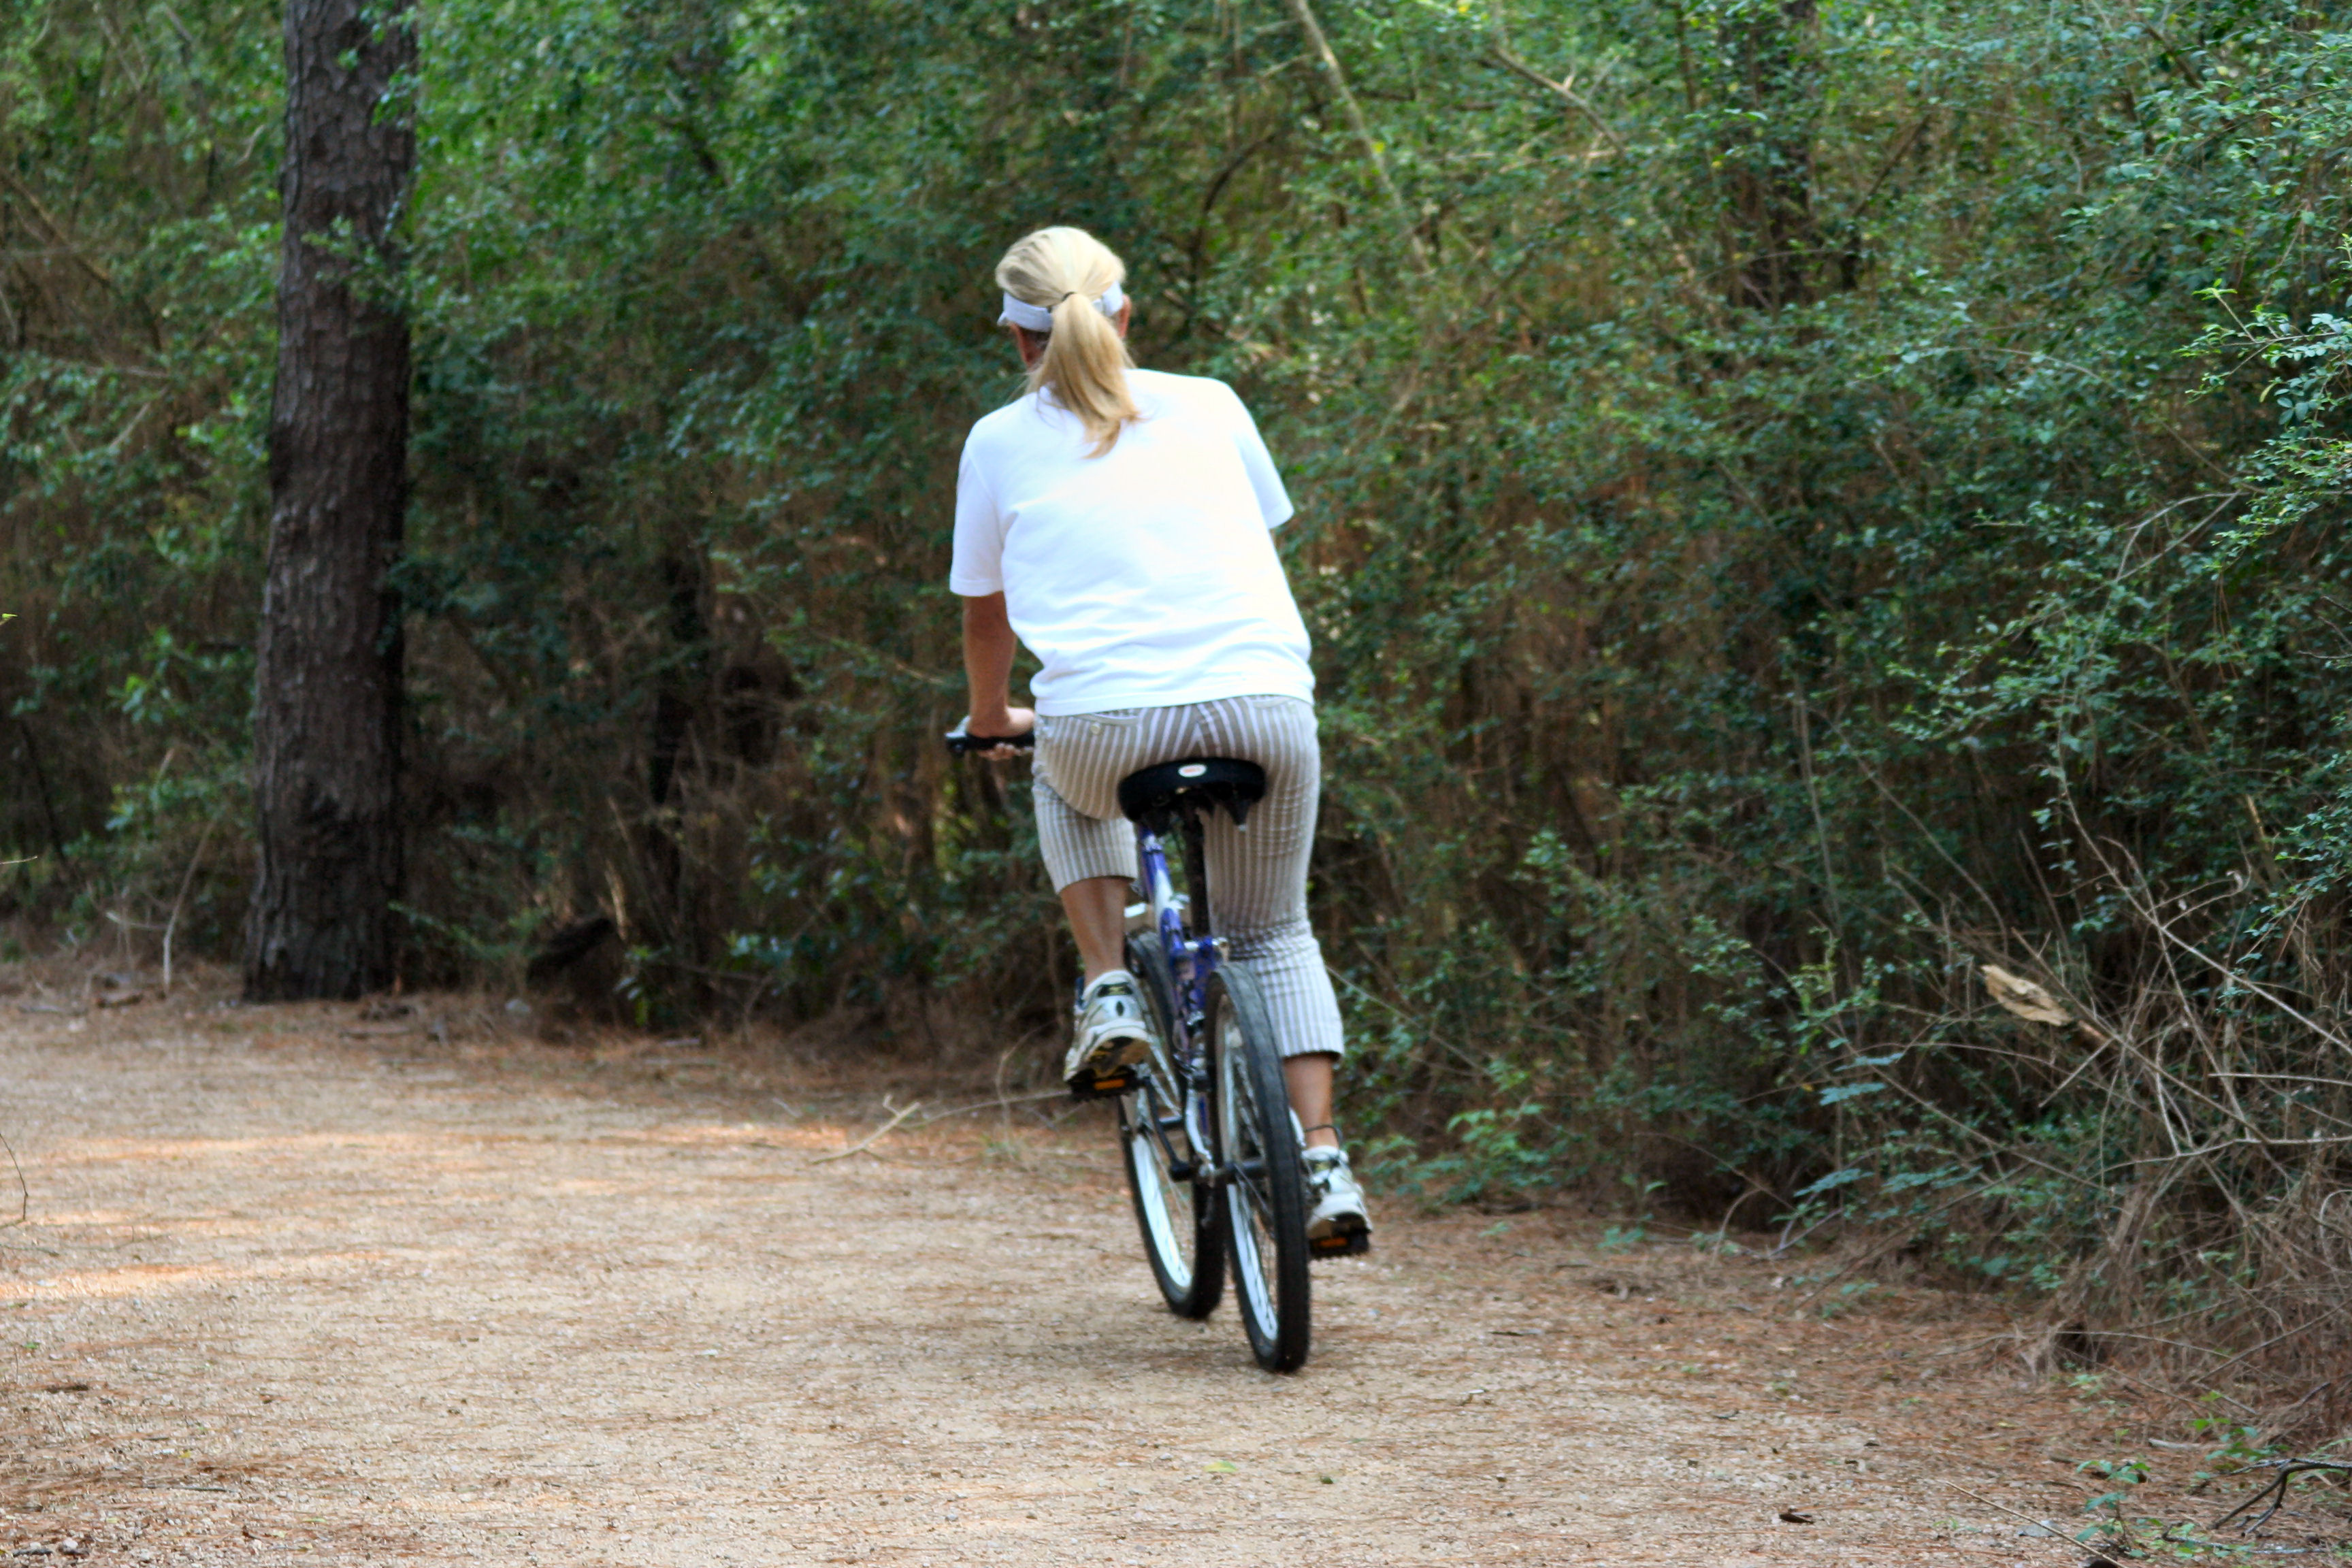 Find time for exercise - Biking through the woods